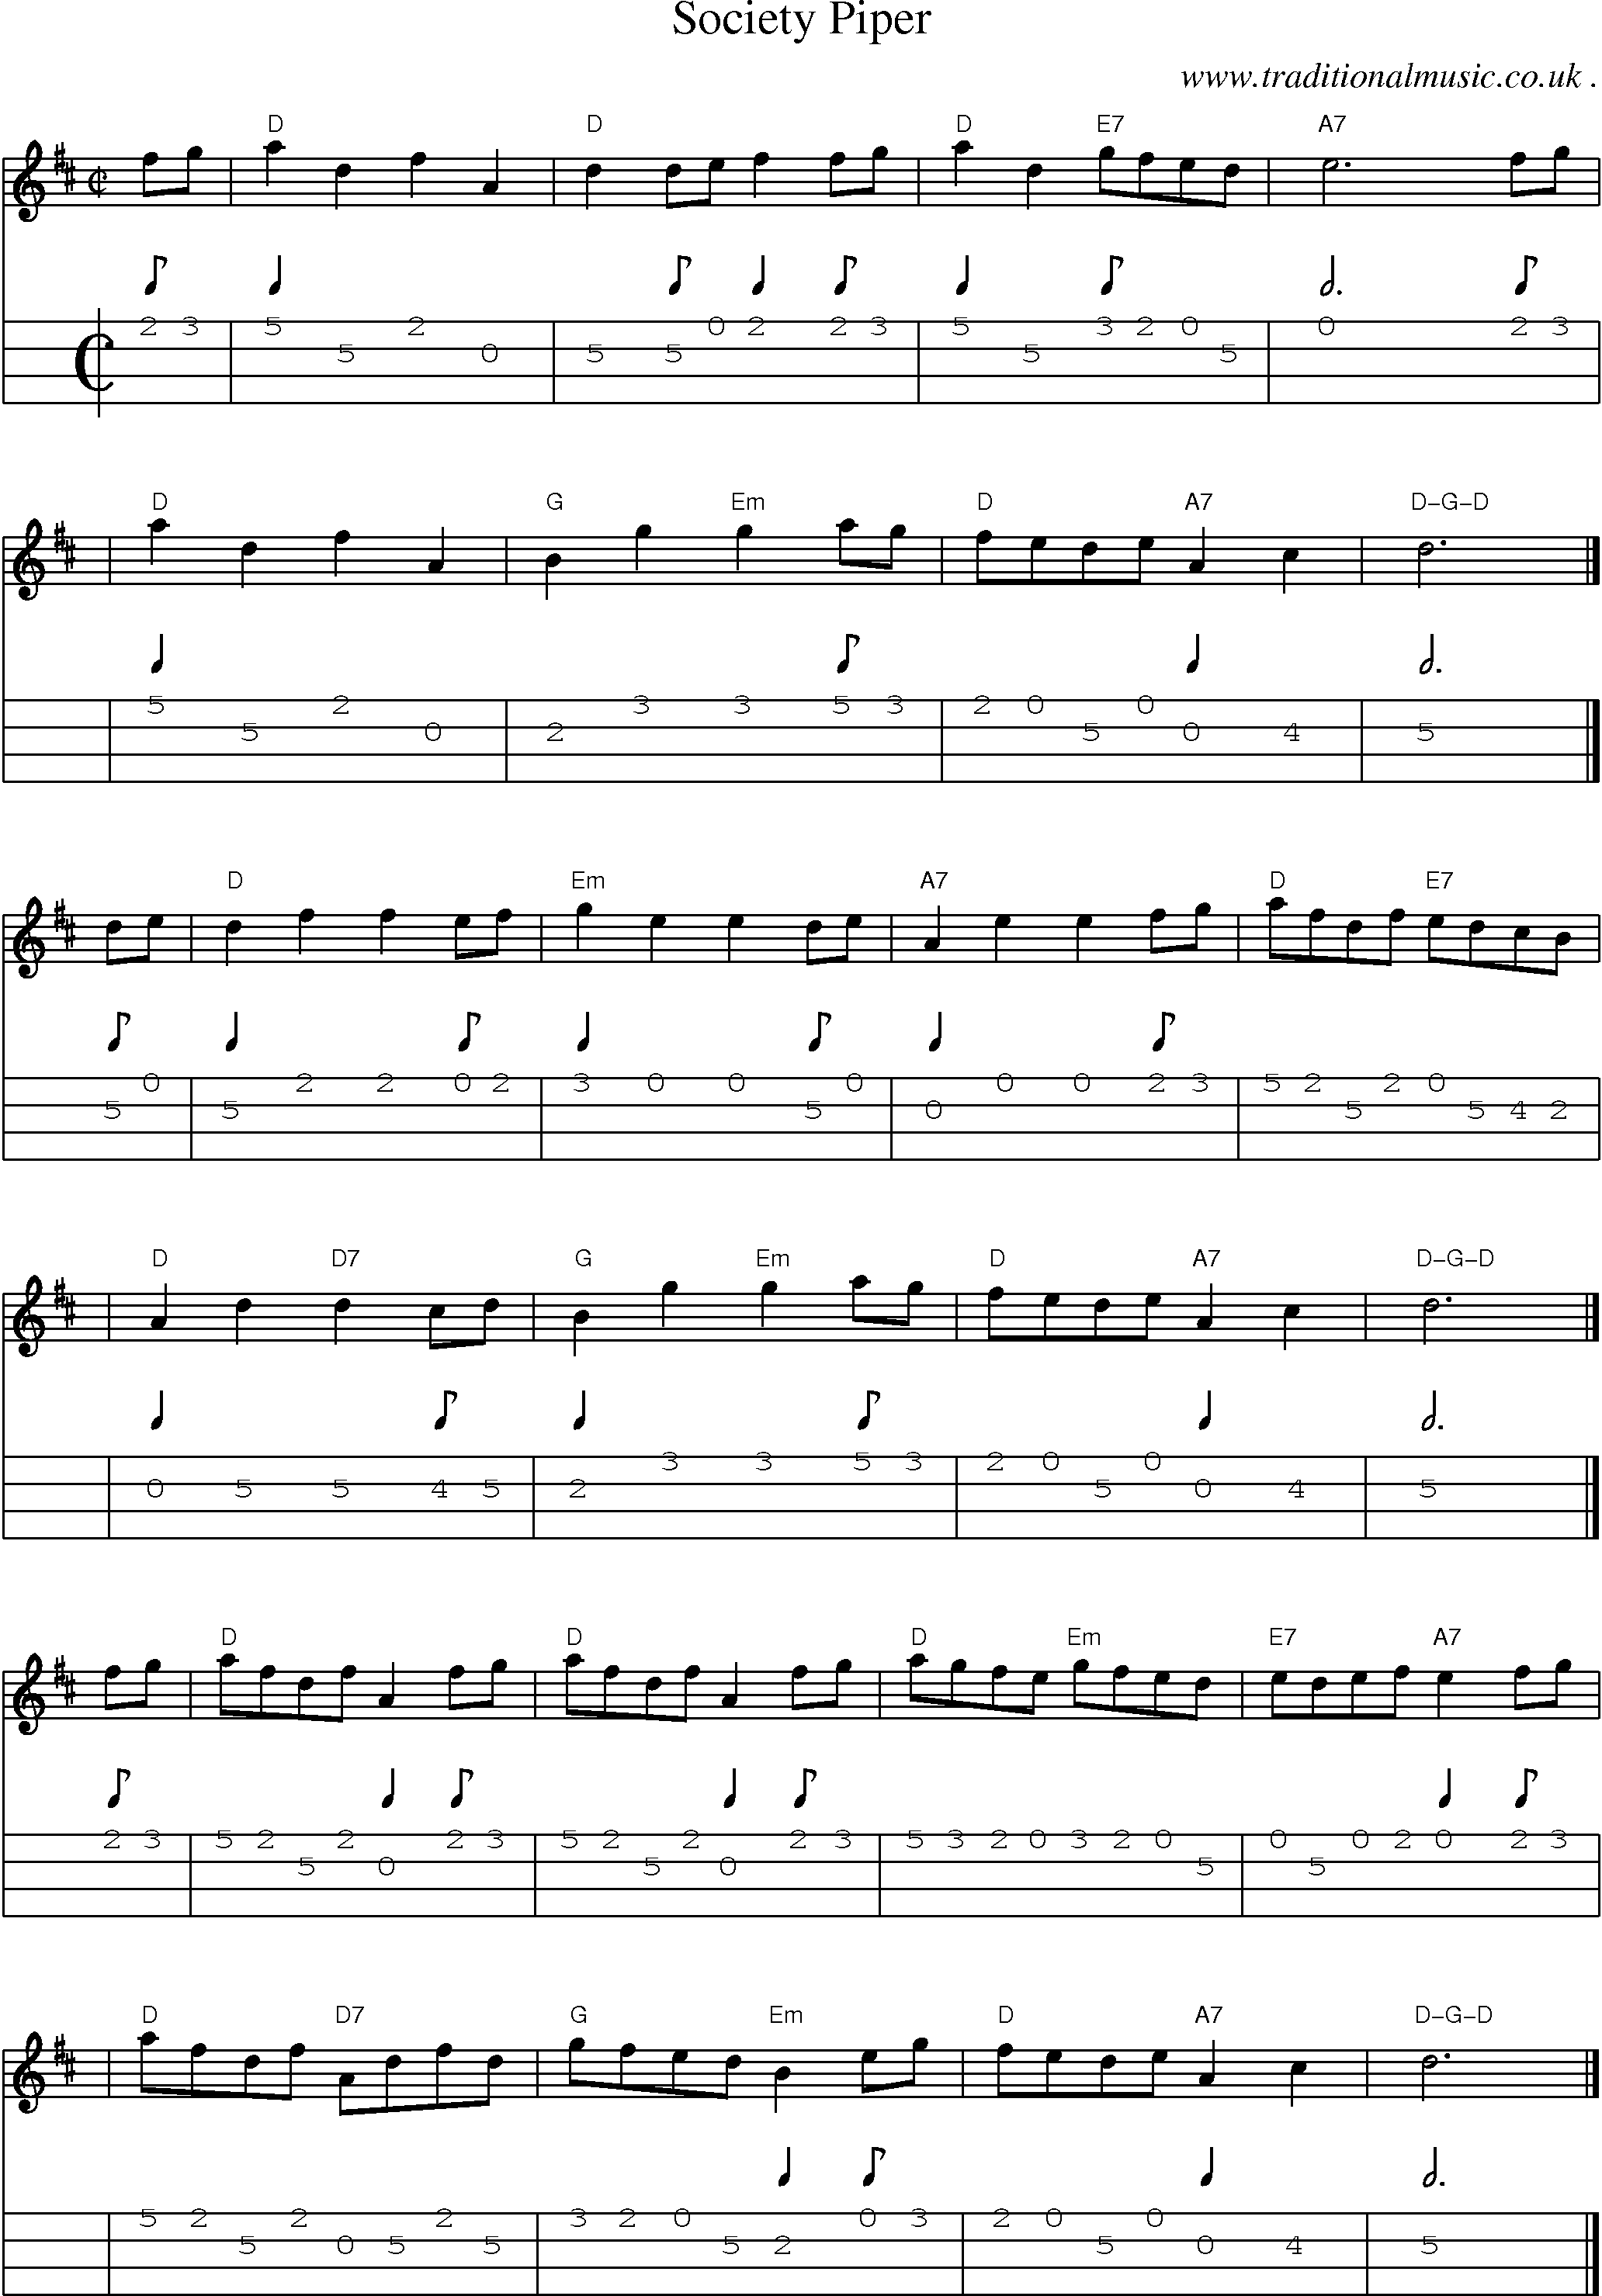 Sheet-music  score, Chords and Mandolin Tabs for Society Piper